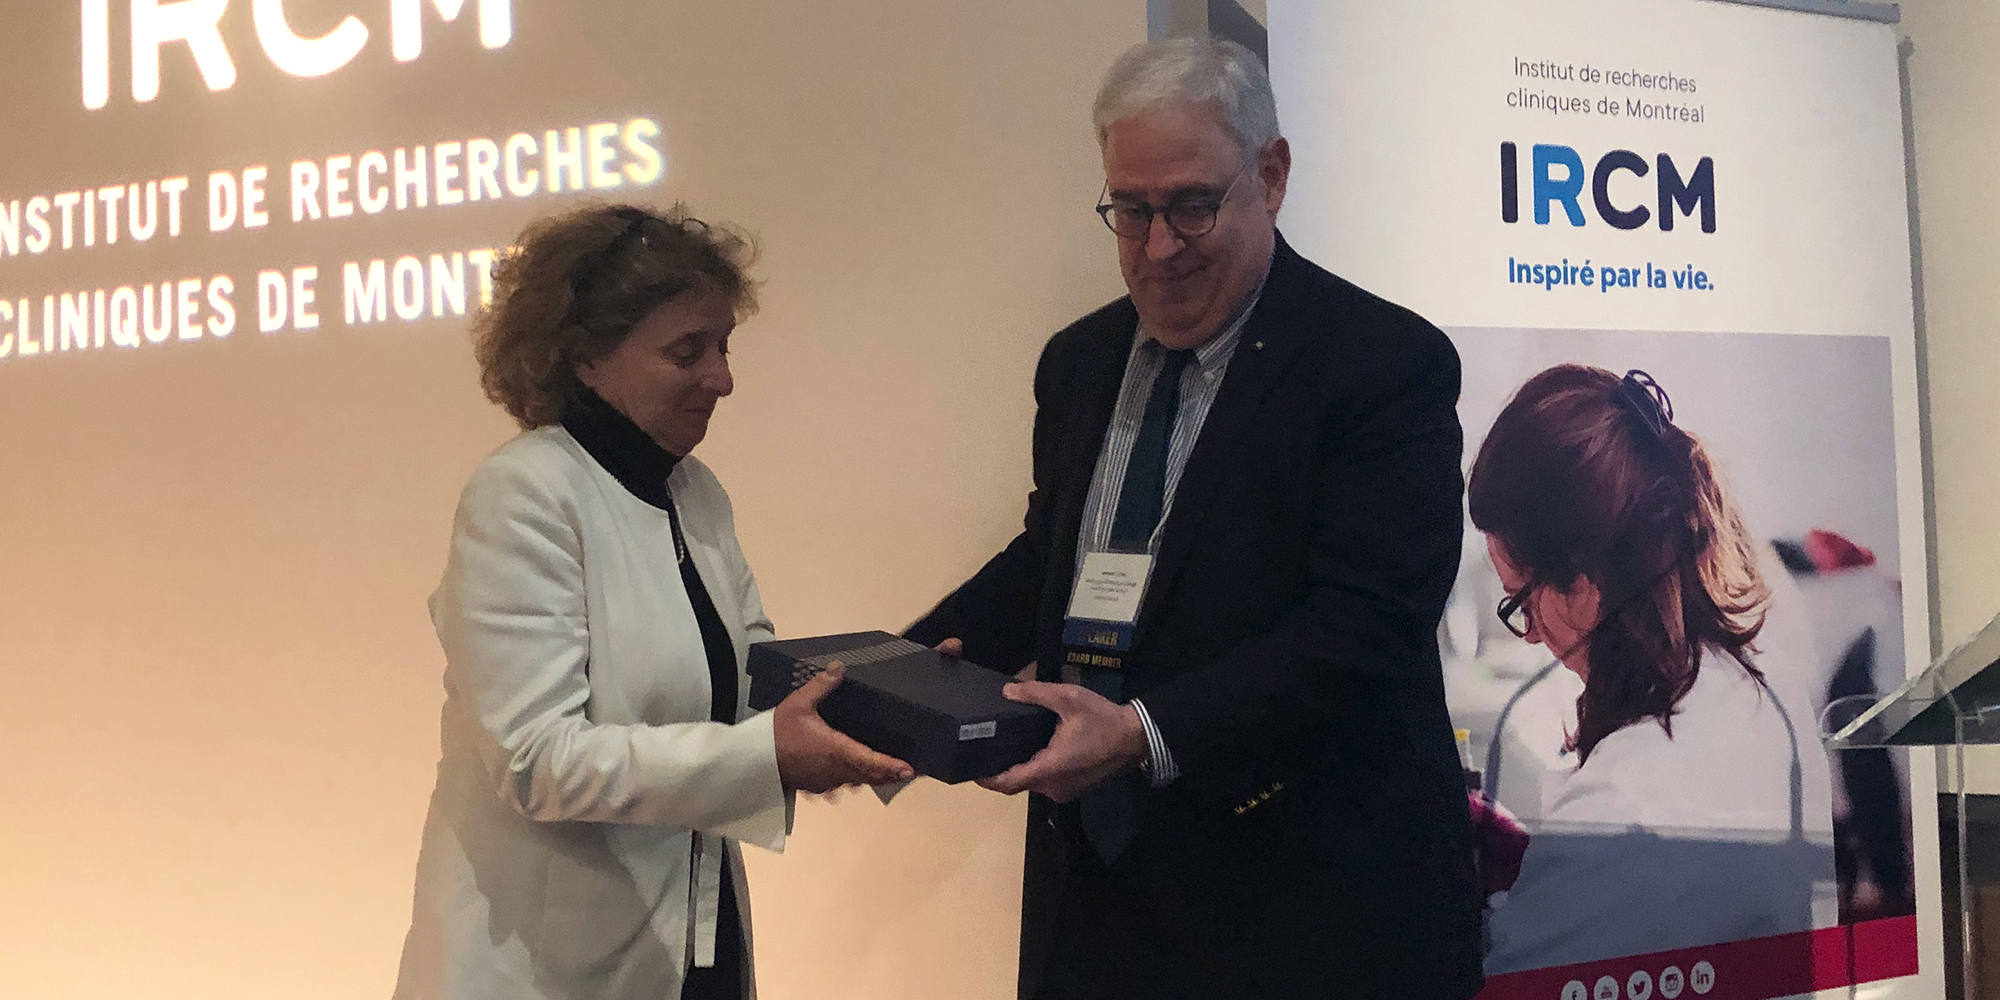 Judy Illes accepting a box with an award named after her, presented by Joseph J. Fins, INS President, at the 2022 INS Annual Meeting in Montreal, Canada;